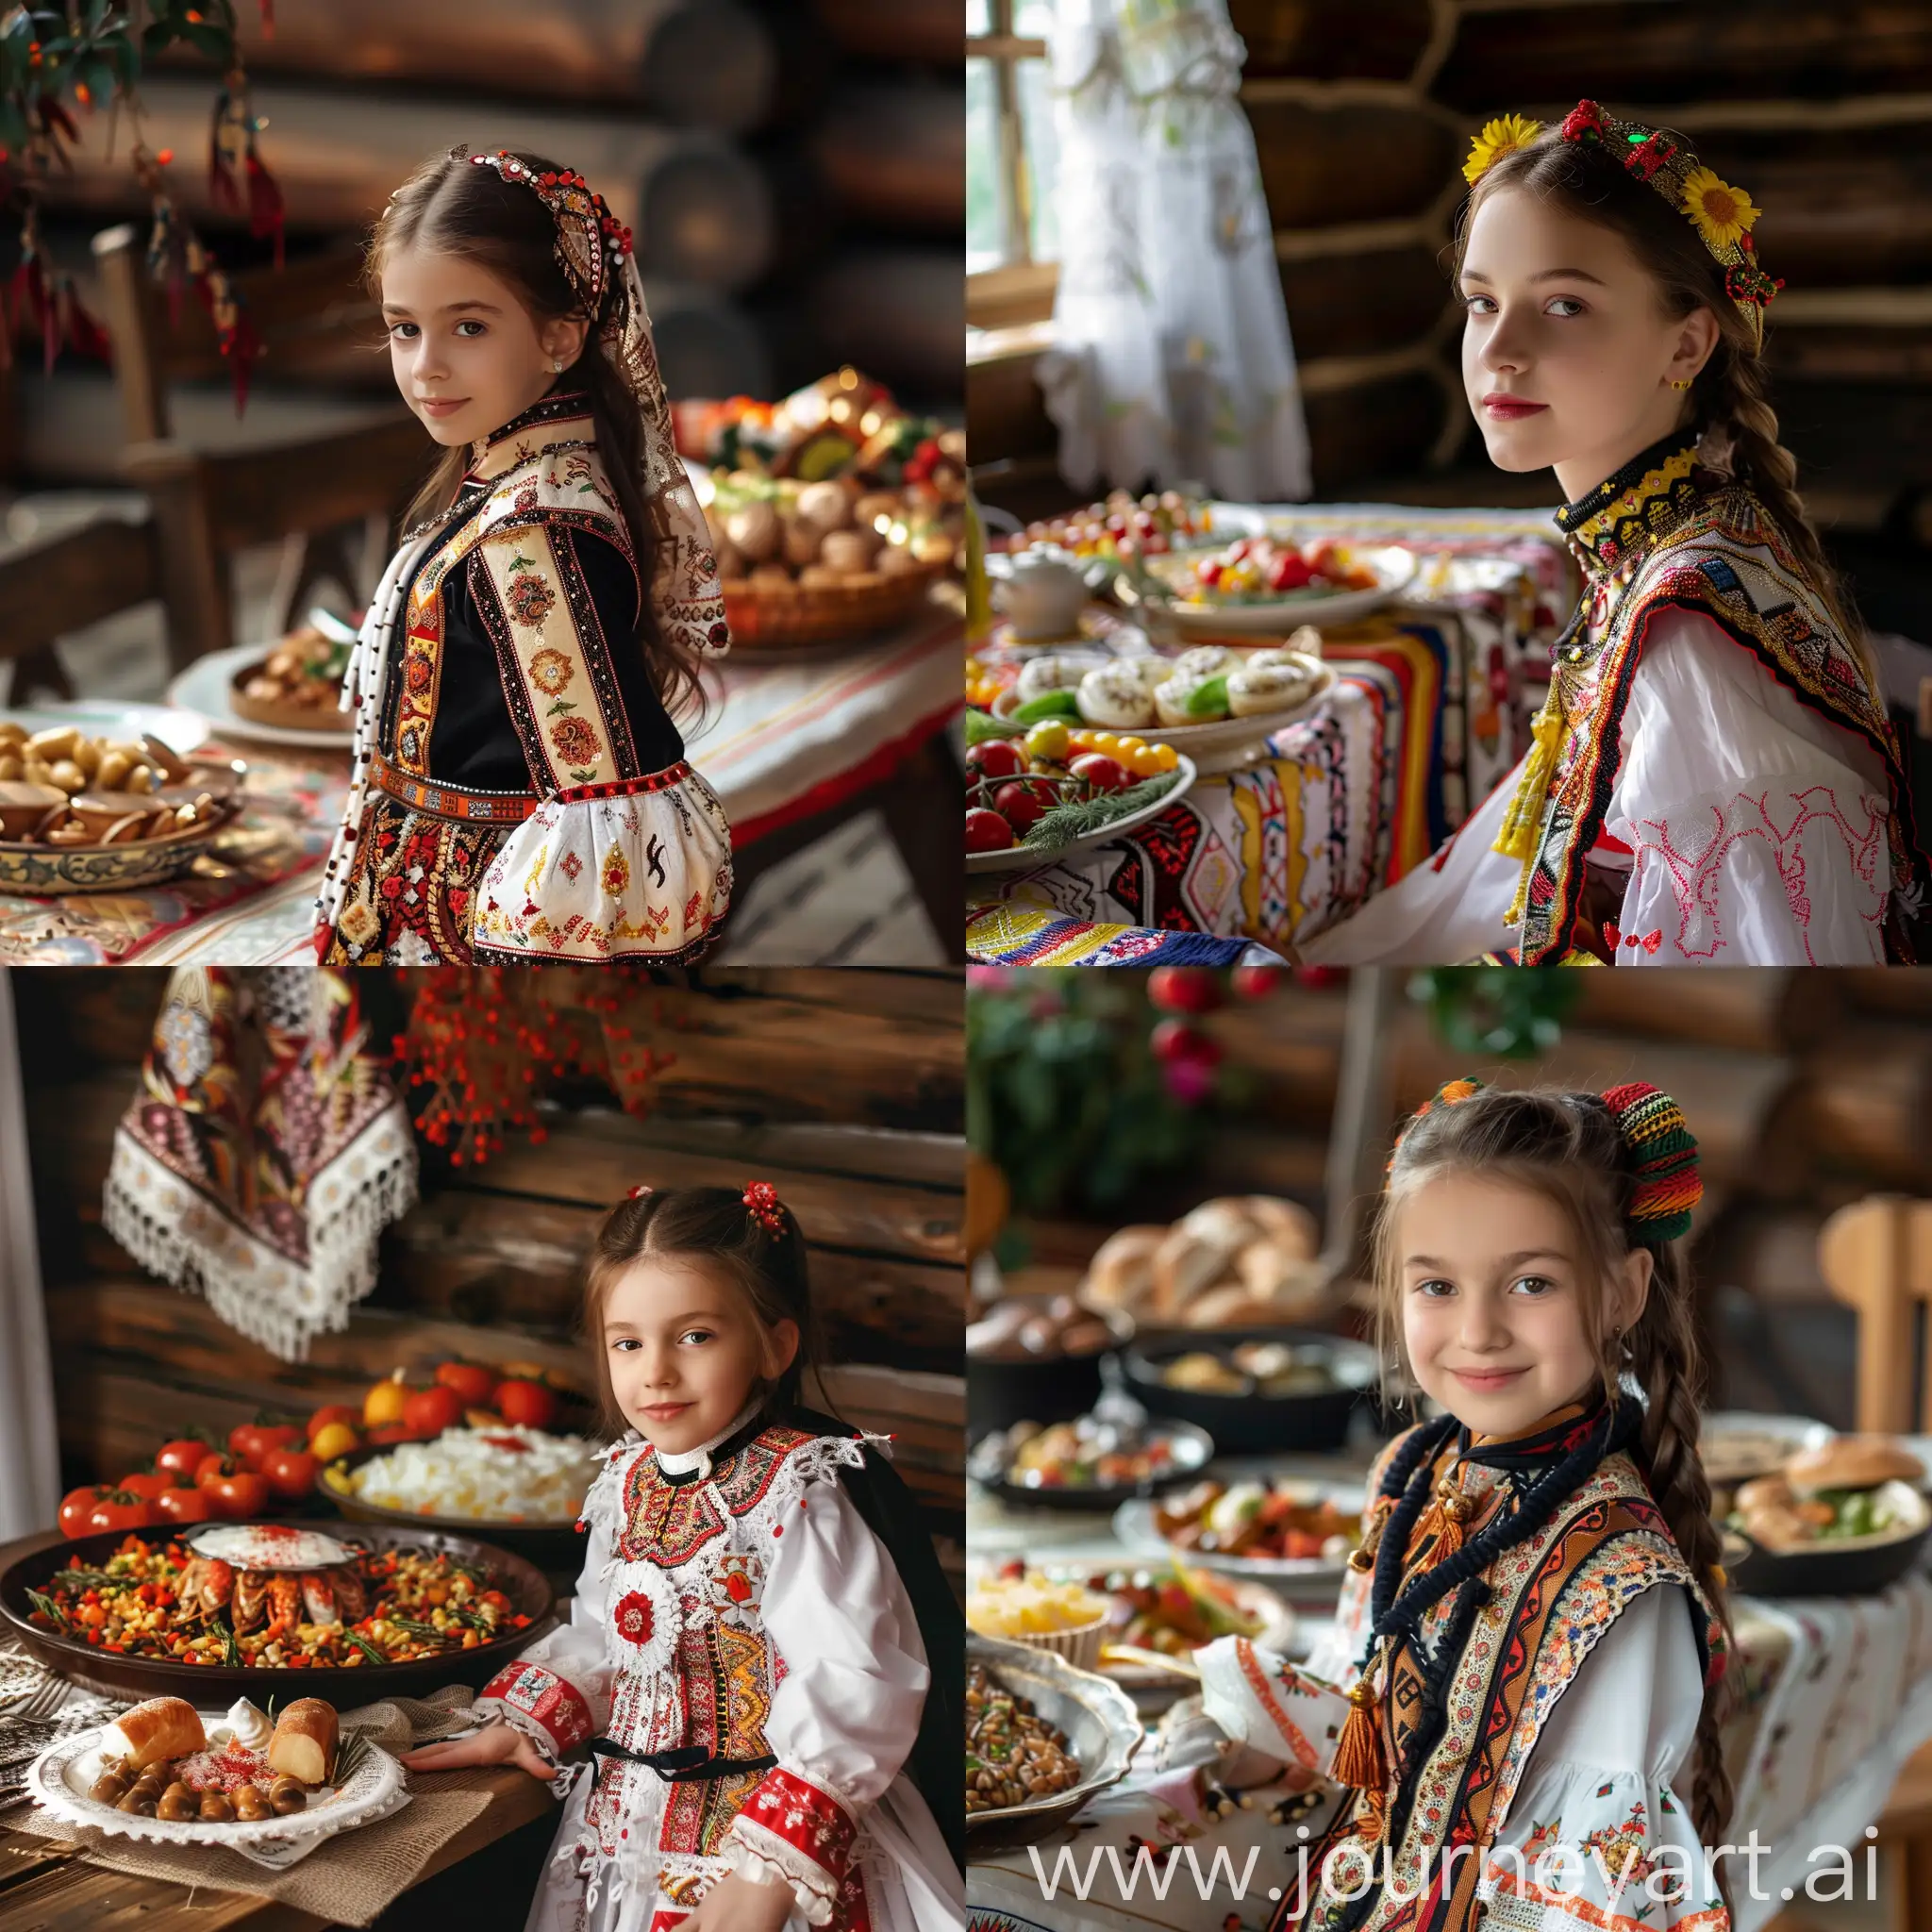 A girl in a traditional Romanian costume near a table with Romanian dishes